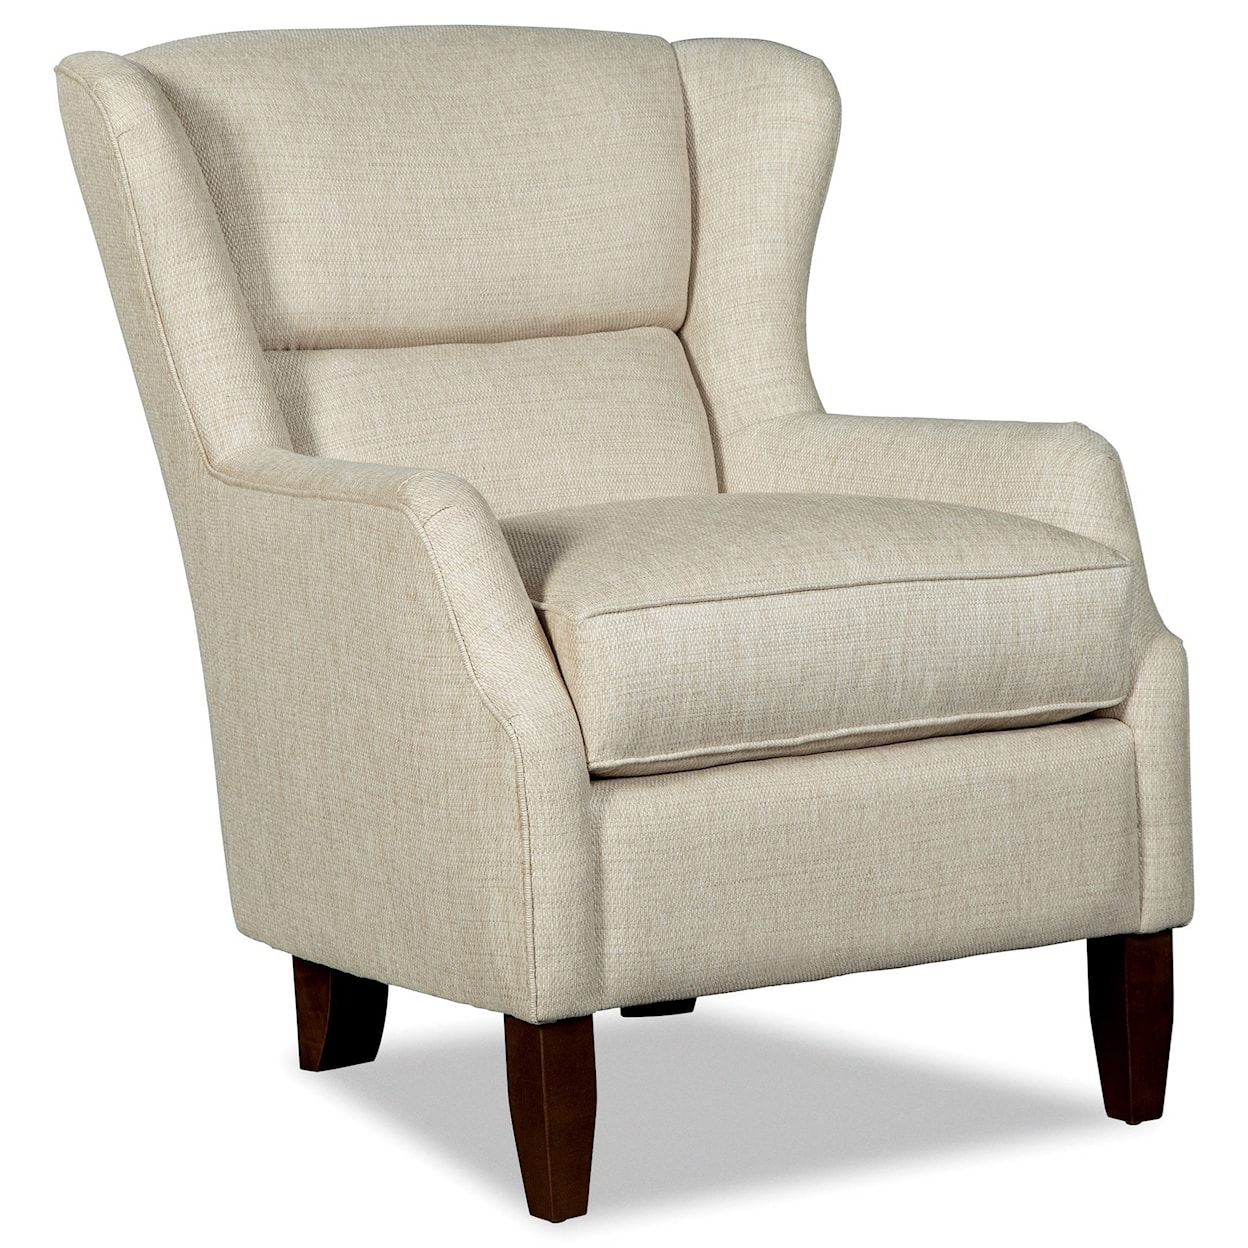 Craftmaster 007910 Wing Chair